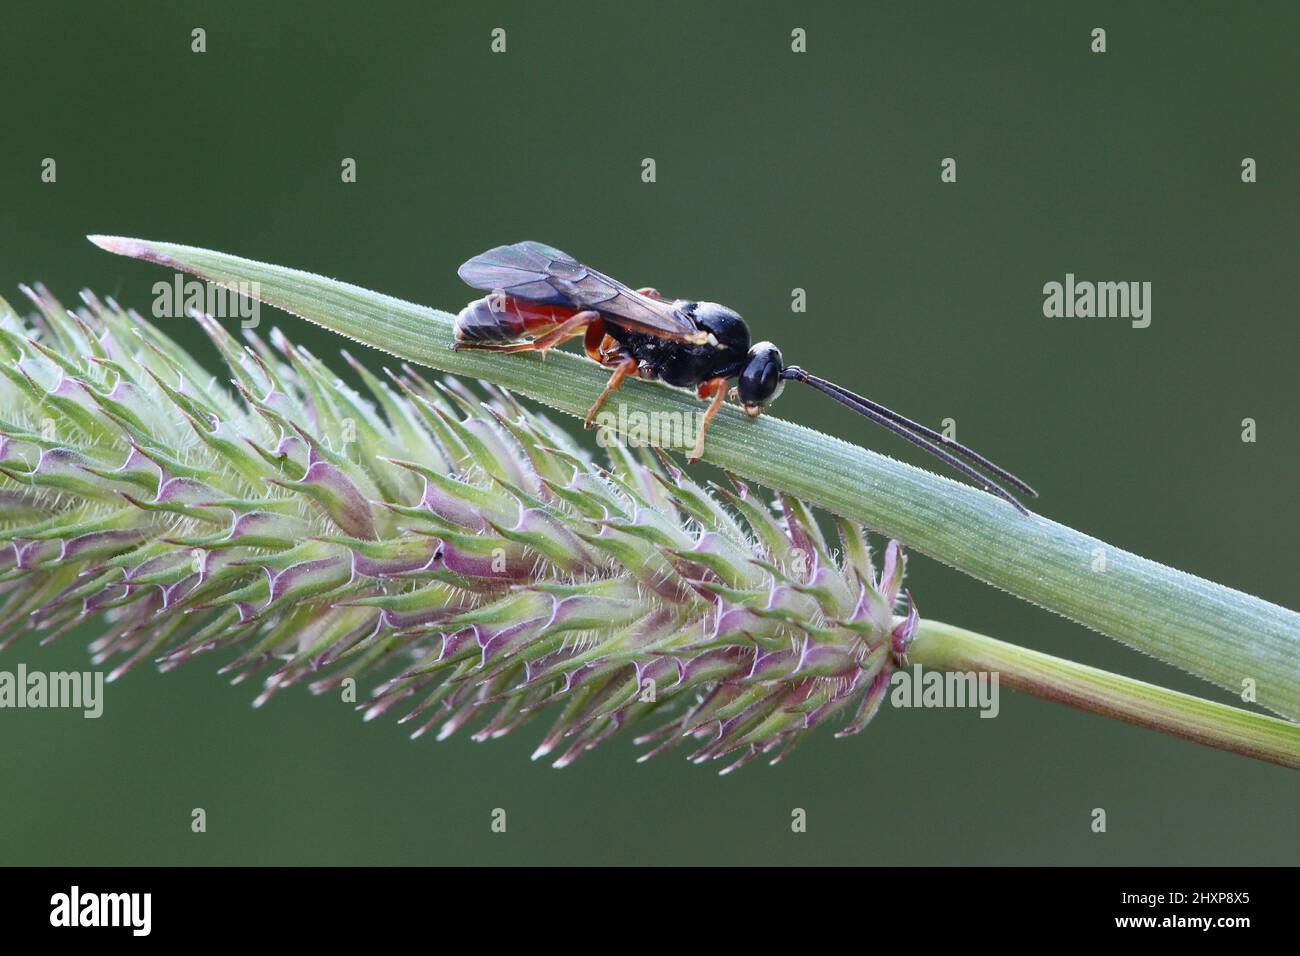 Parasitoid wasp on Timothy grass Stock Photo